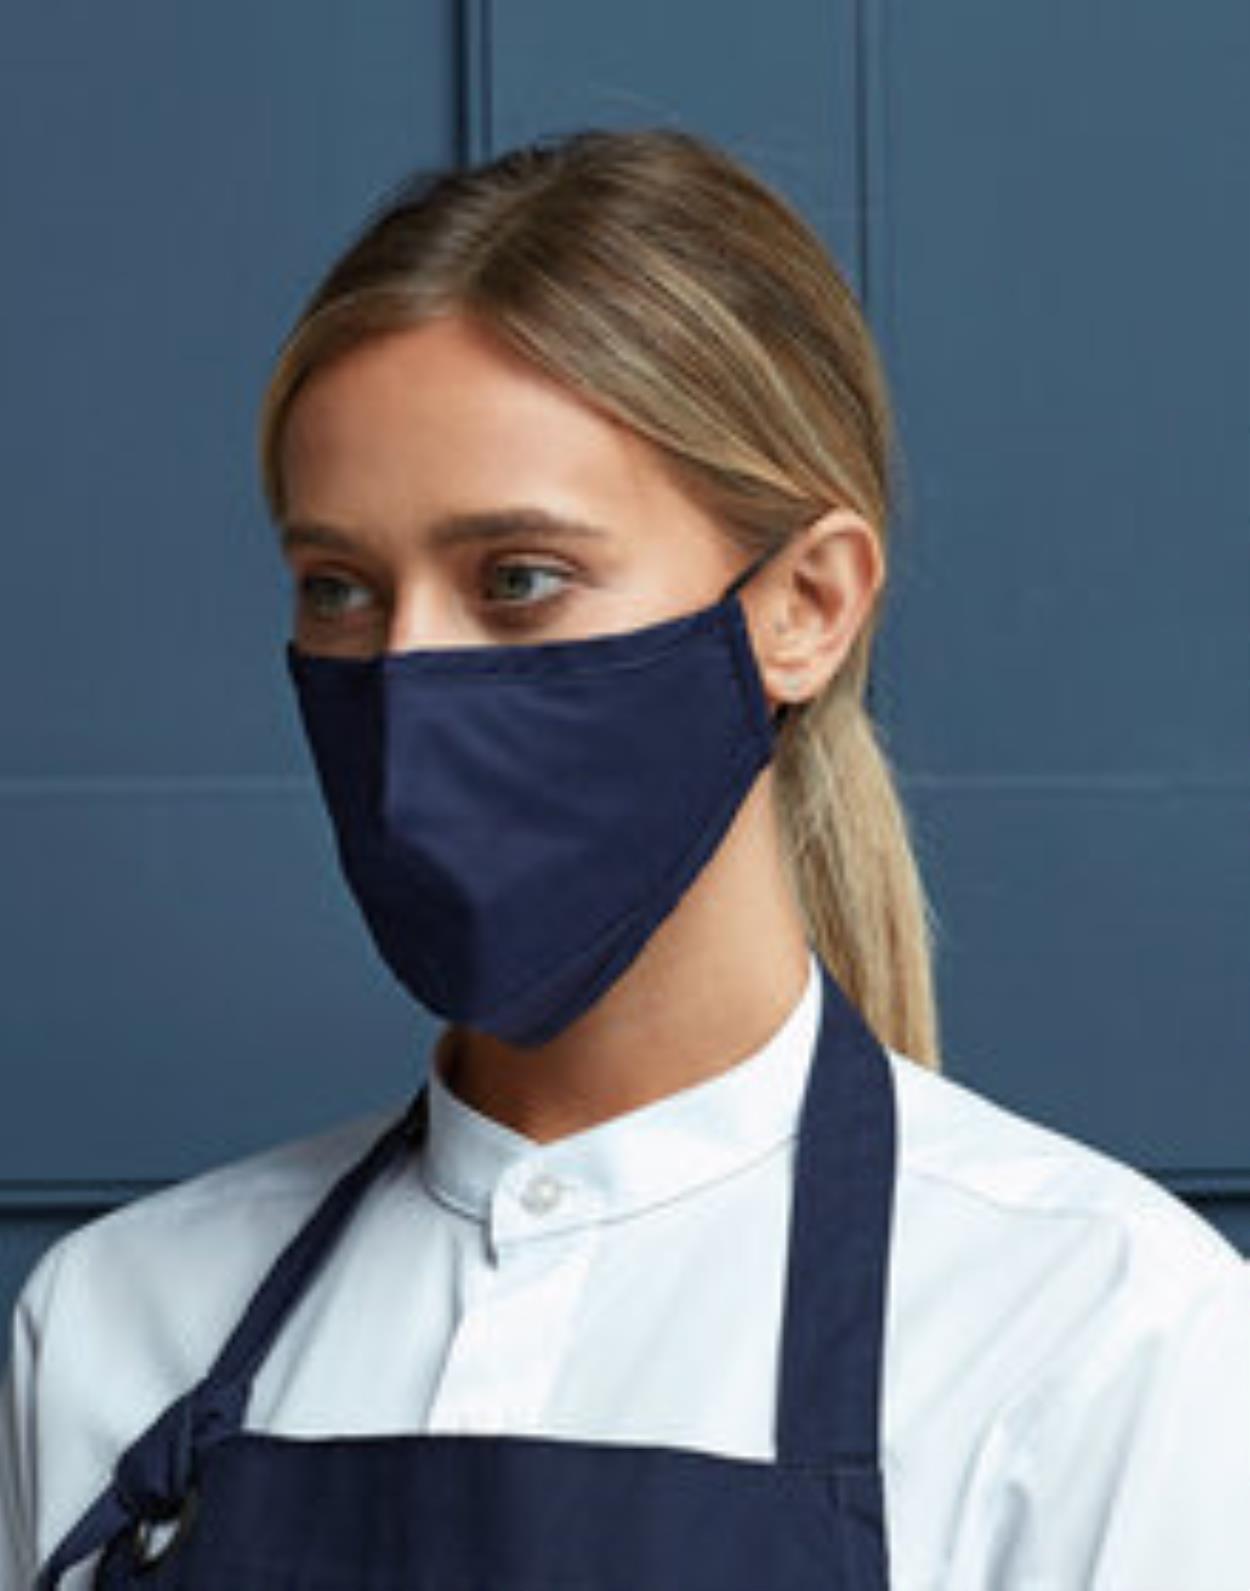 PR796 Face Covering Protective 3 Layer Fabric Mask Image 1